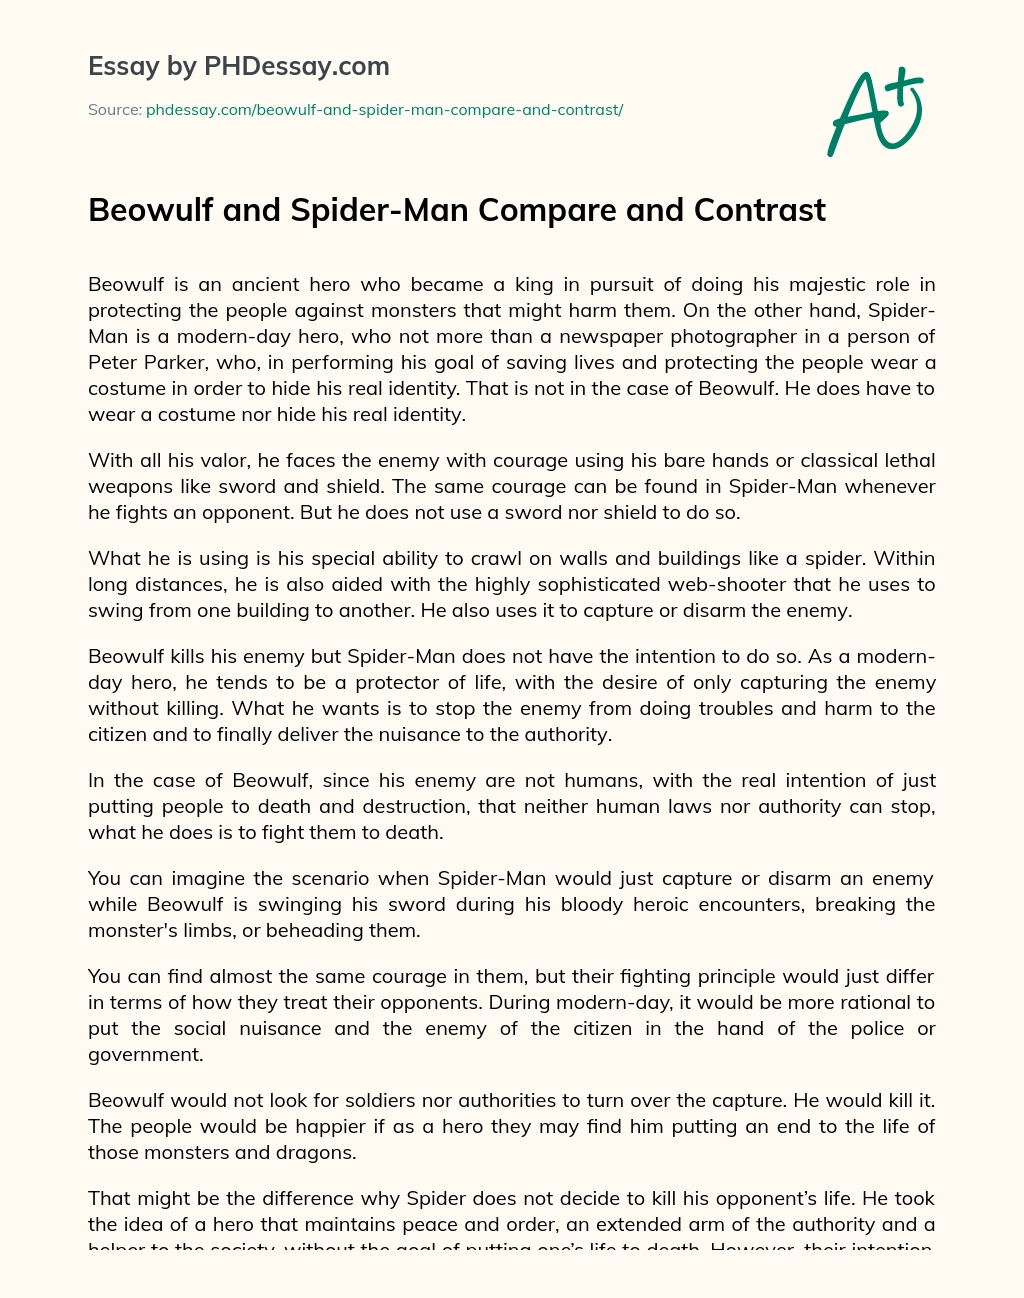 Beowulf and Spider-Man Compare and Contrast essay